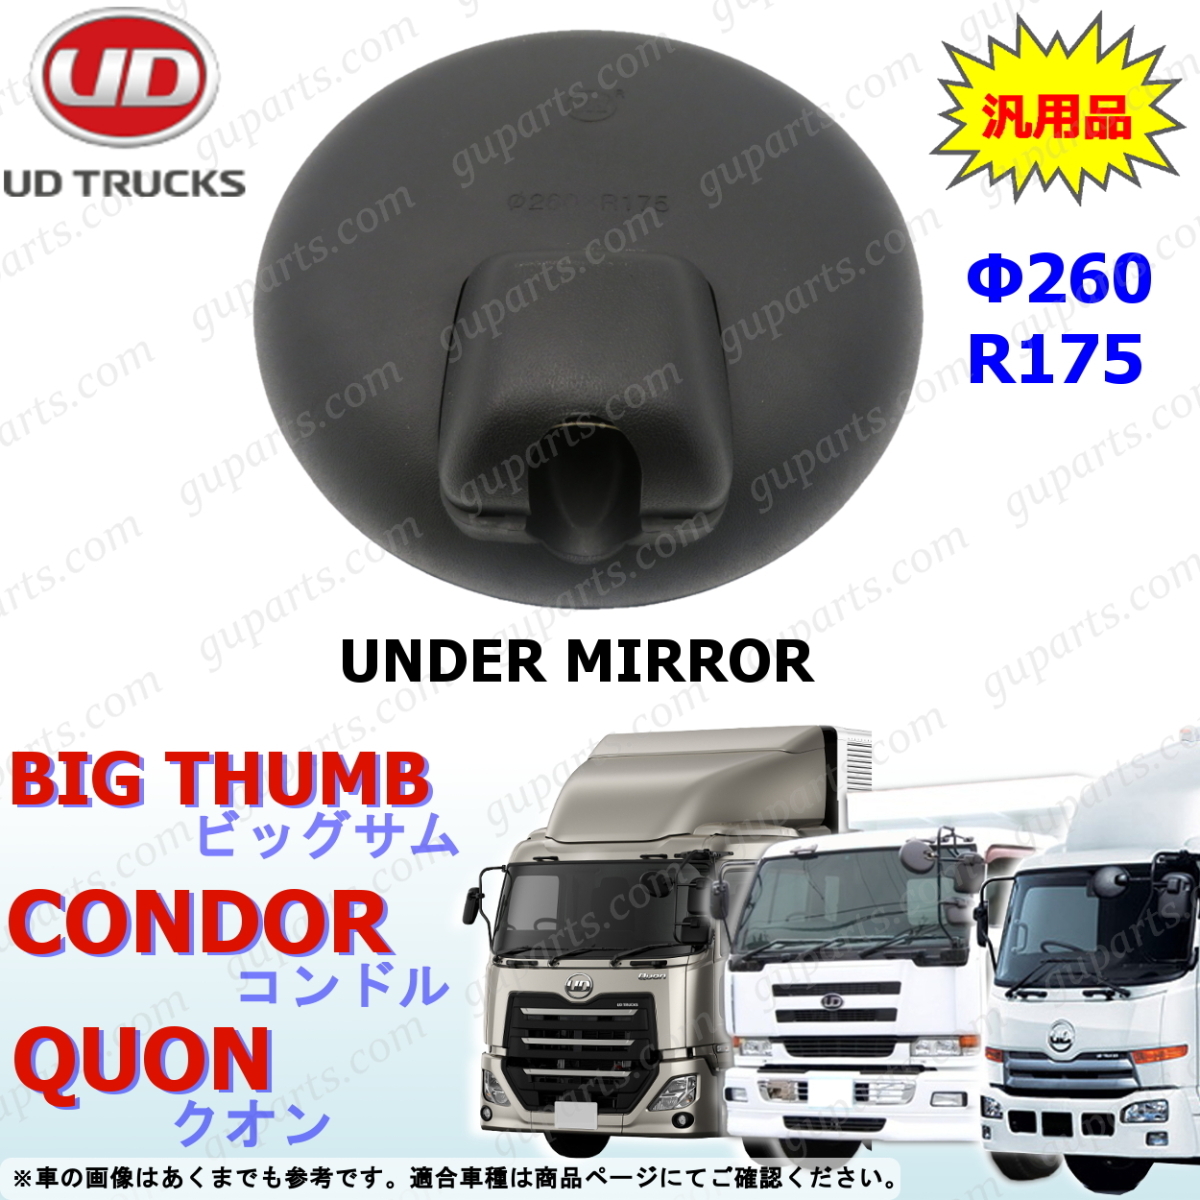 UD Big Thumb k on fine Condor fine Condor under mirror Φ260 R175 side view - Nissan diesel large truck all-purpose 